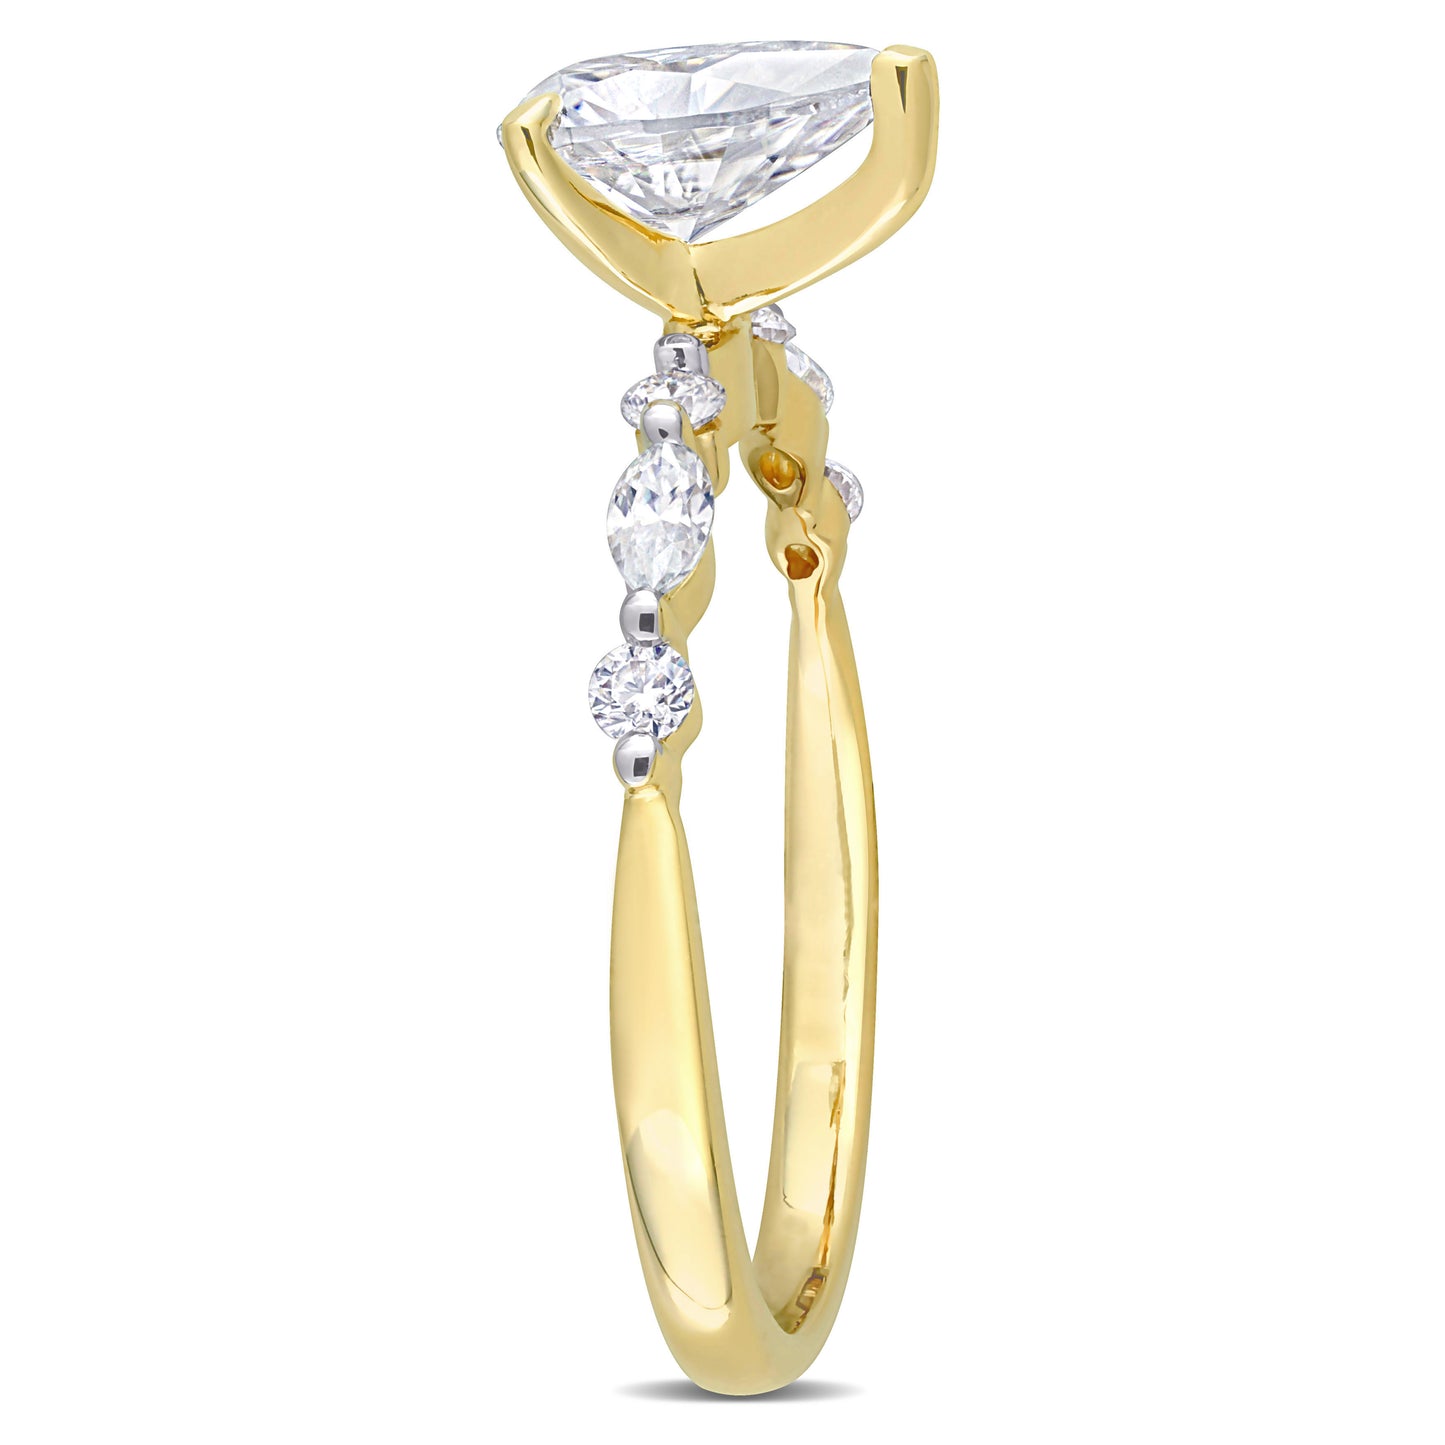 Pear Moissanite Ring in 10k Yellow Gold